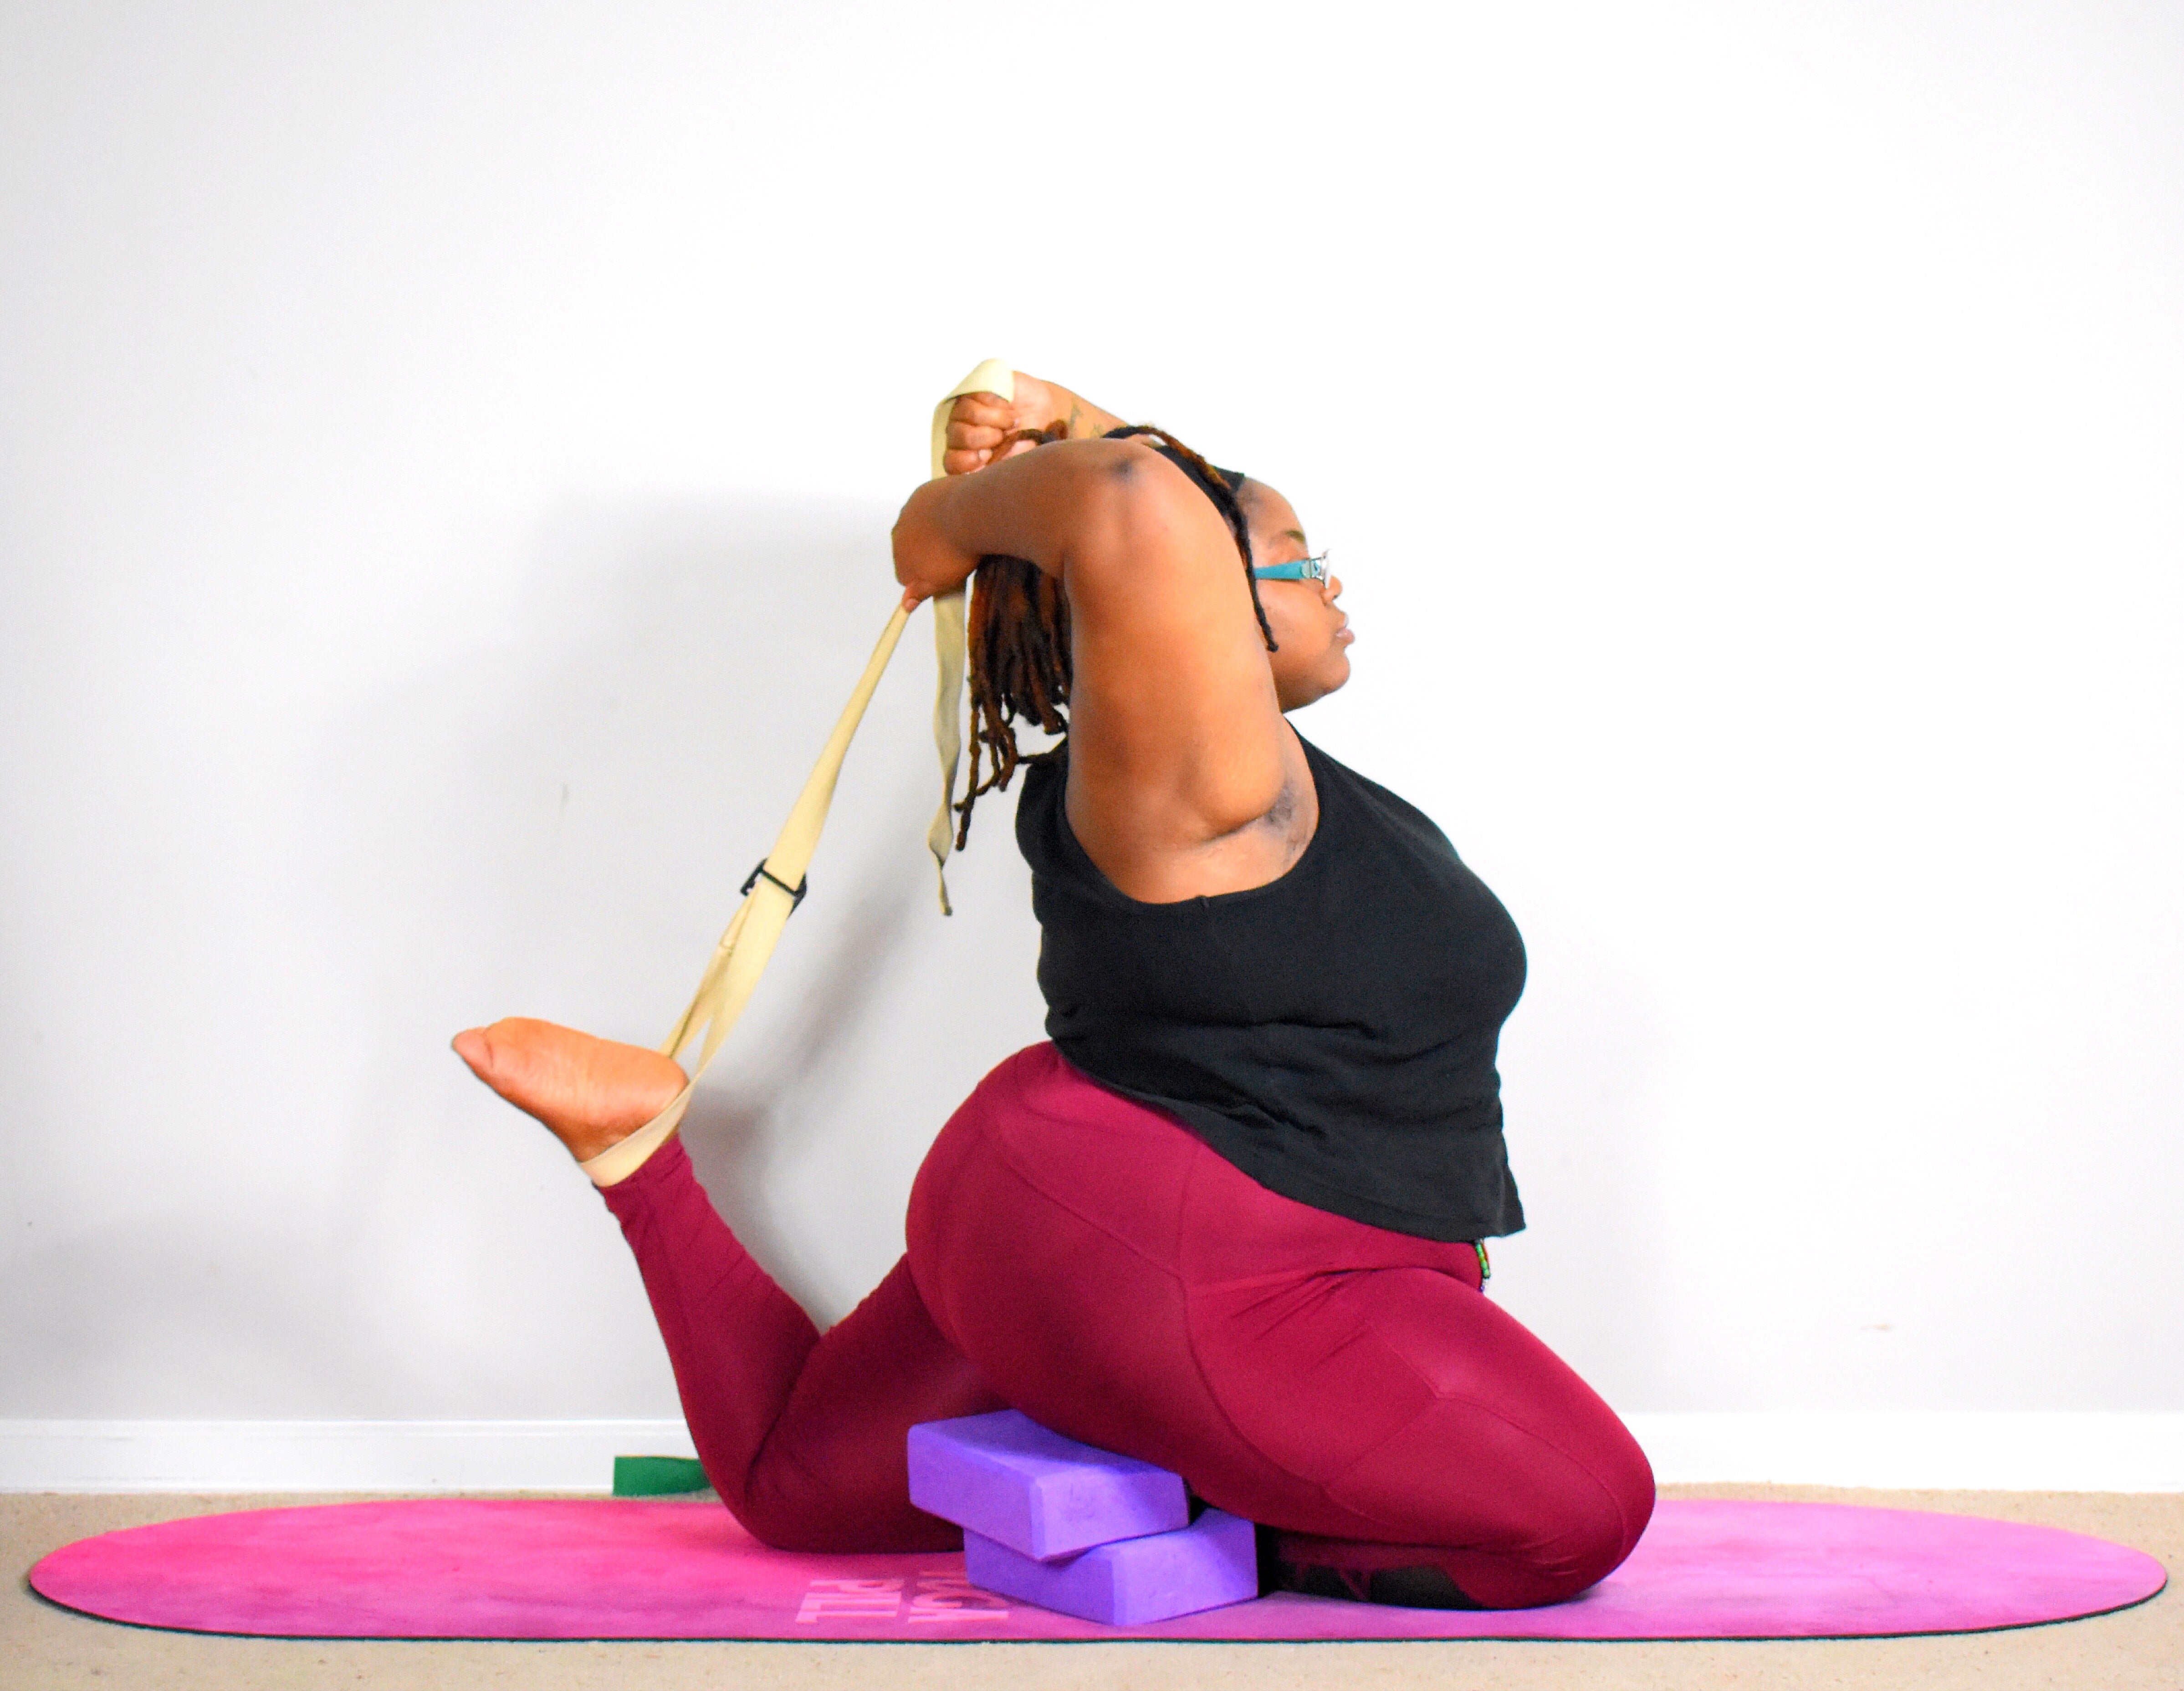 How To Make Your Own Yoga Props